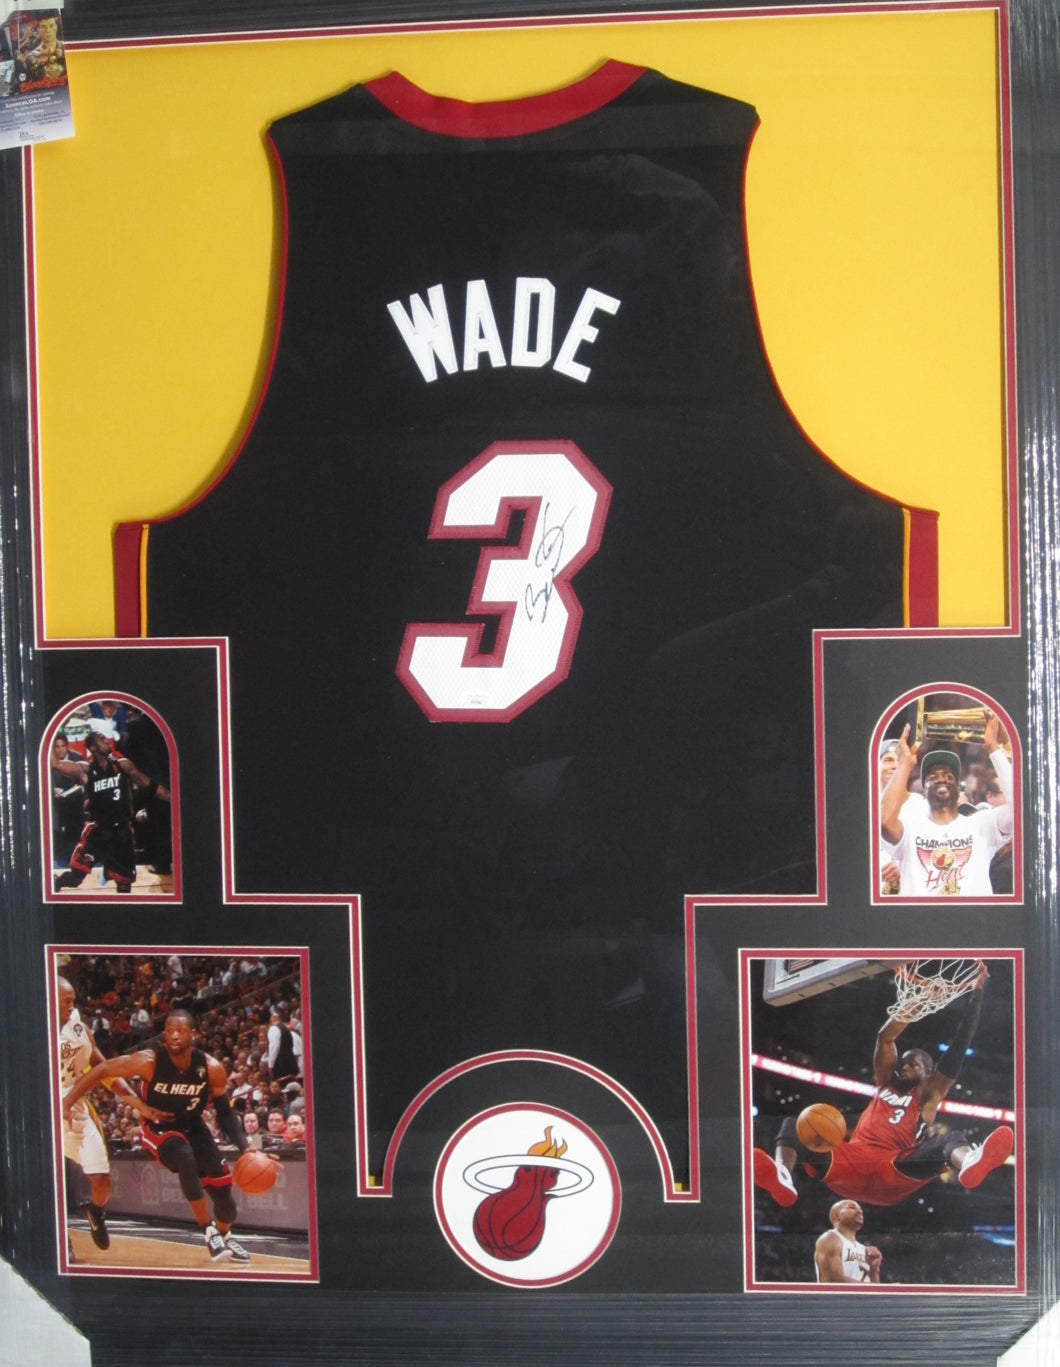 Miami Heat Dwayne Wade Signed Jersey Framed & Matted with JSA COA